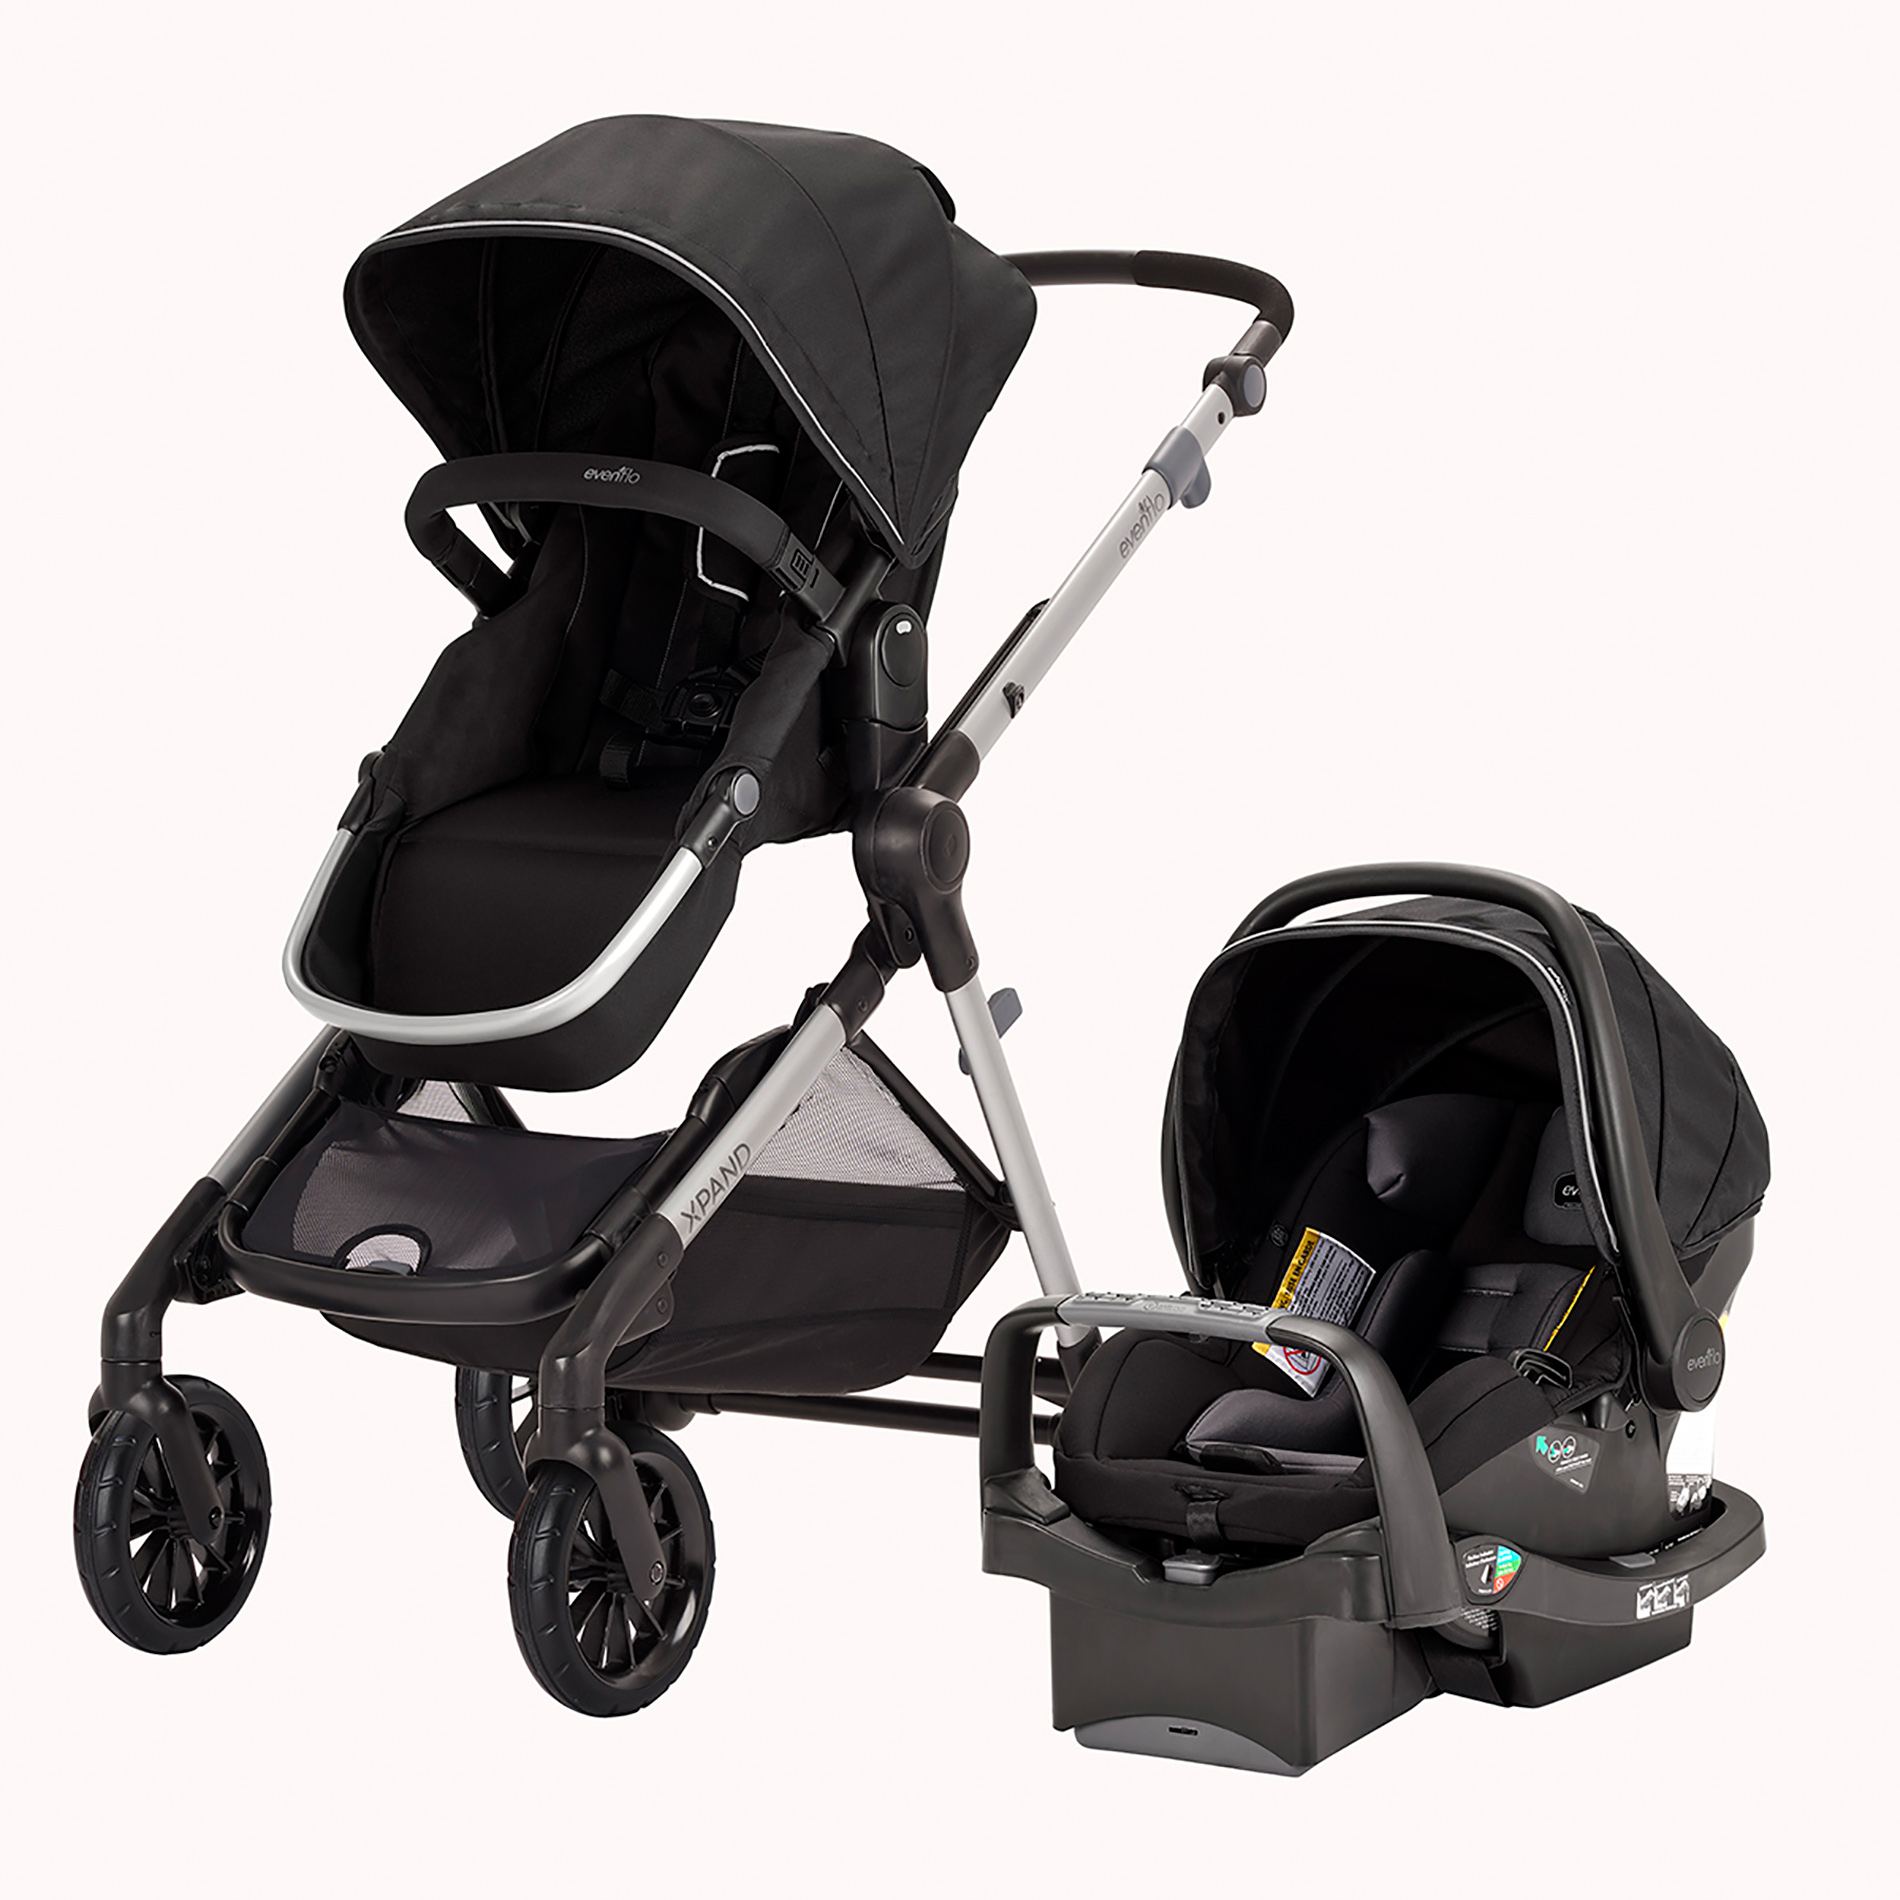 Evenflo Pivot Xpand Modular Travel System with Infant Car Seat